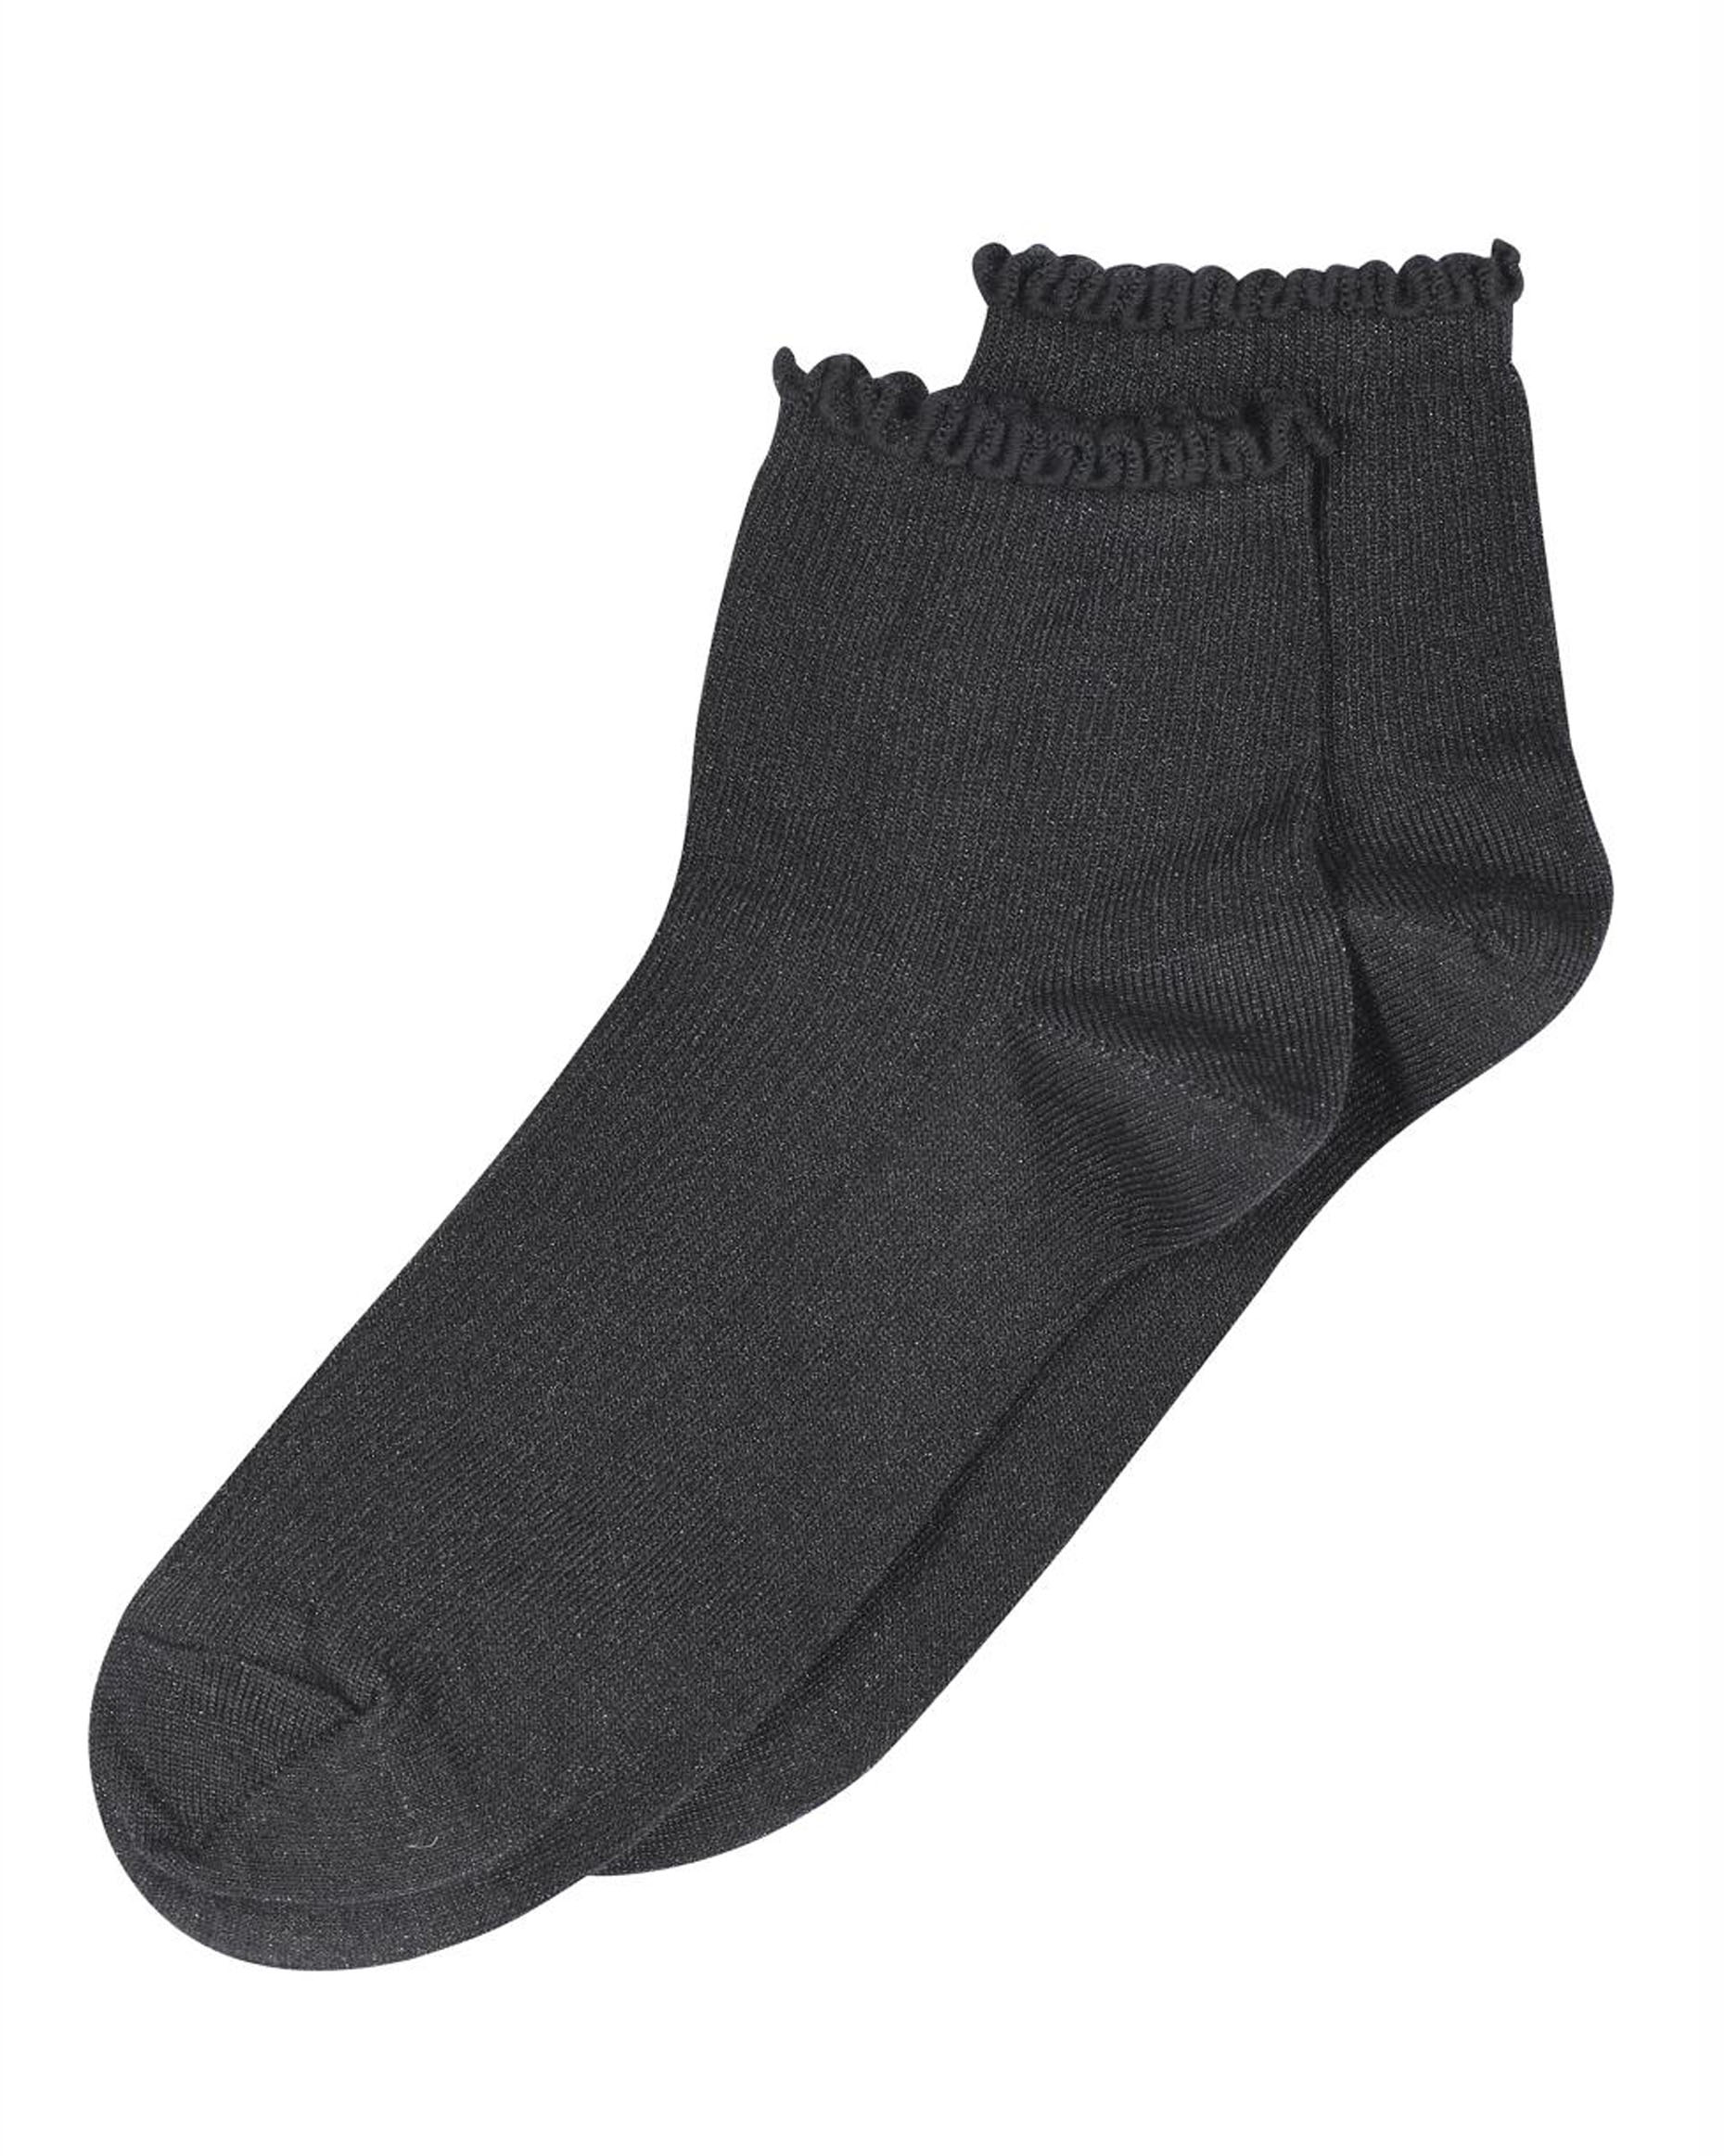 MP Denmark Lis Sock - Black short quarter high ribbed lamé lurex cotton lined ankle socks with with frilly edge, plain sole, shaped heel and flat toe seam.